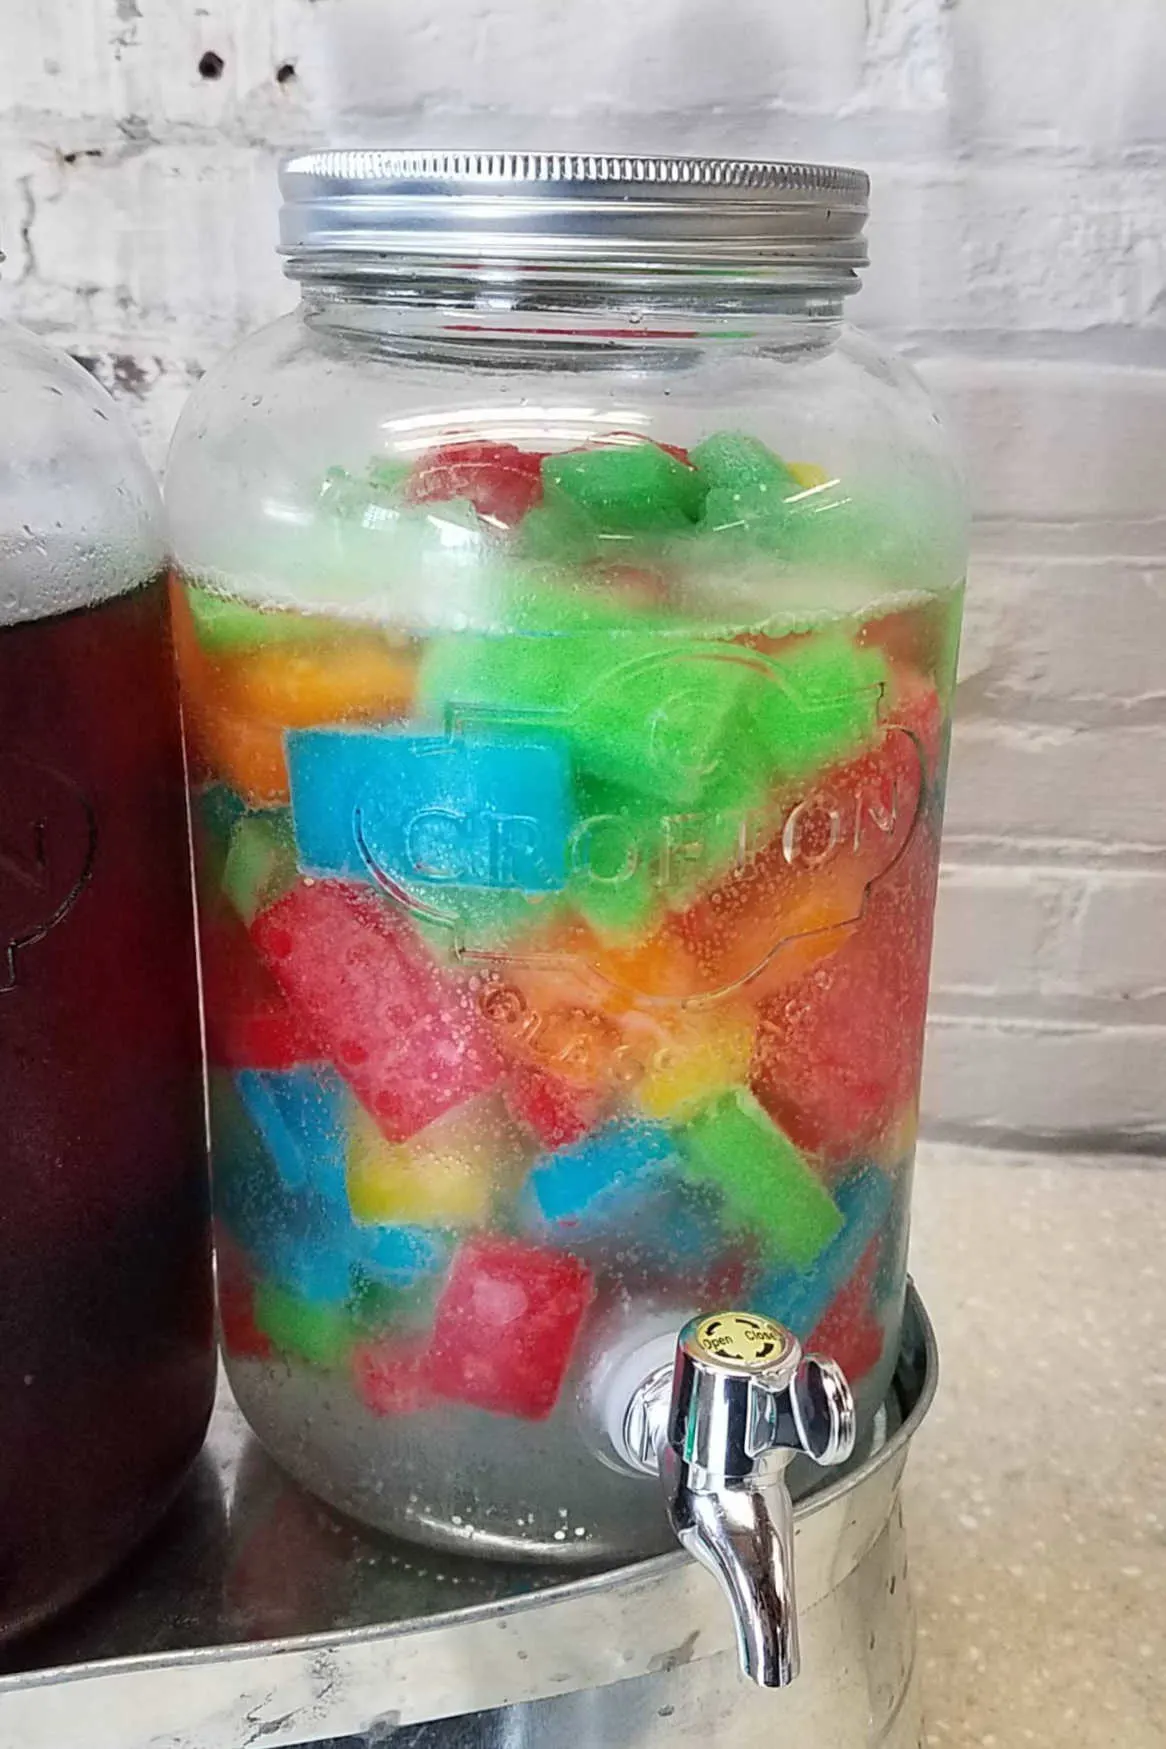 Colorful lego shaped ice made from jello floating in sprite in drink dispenser.